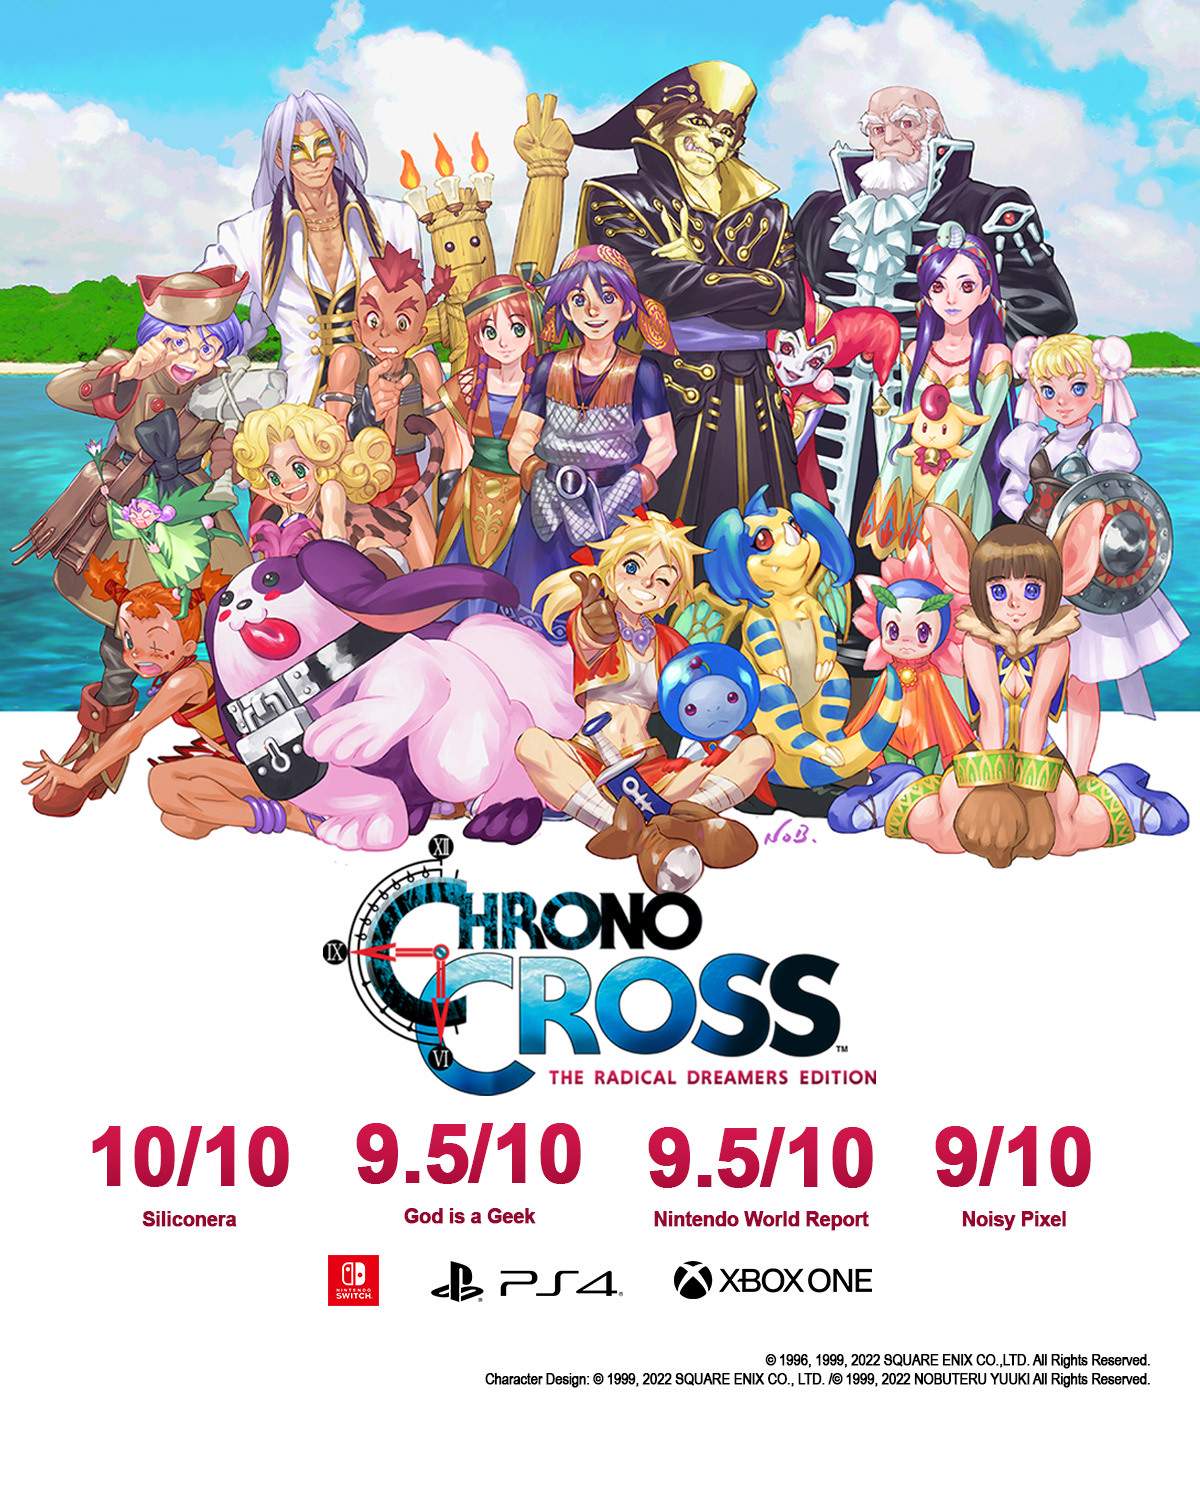 Chrono Cross artwork showing characters together, with the game logo and review scores underneath